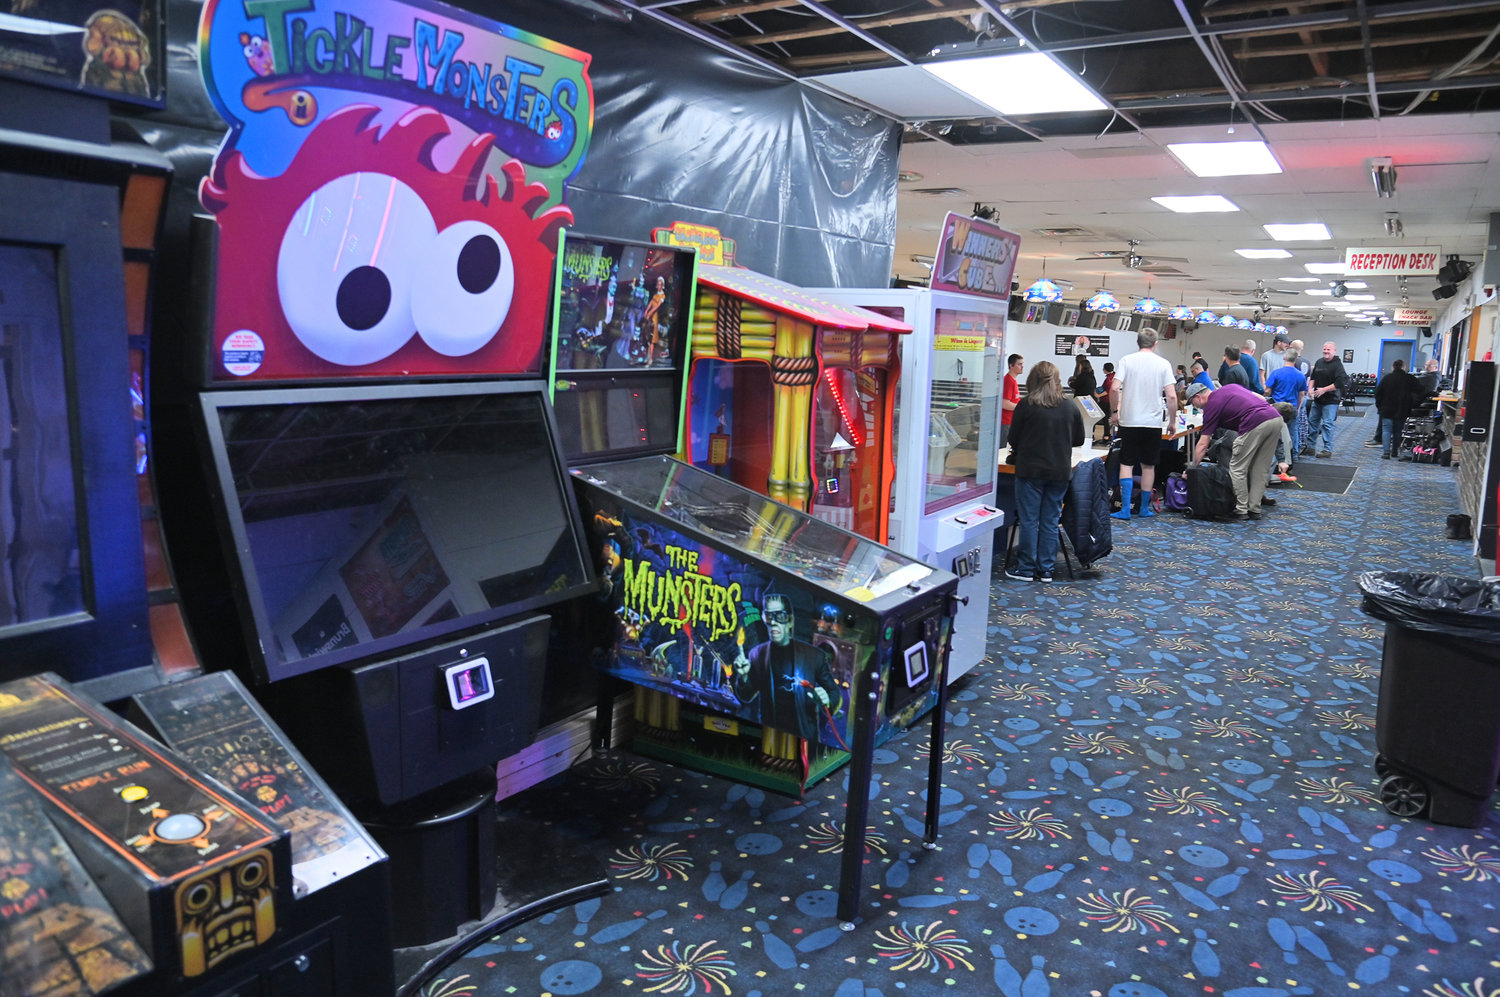 Some arcade games have arrived at King Pin Lanes waiting to be installed in the new gaming area at the East Dominick Street bowling center. The arcade is scheduled to open sometime in the spring.